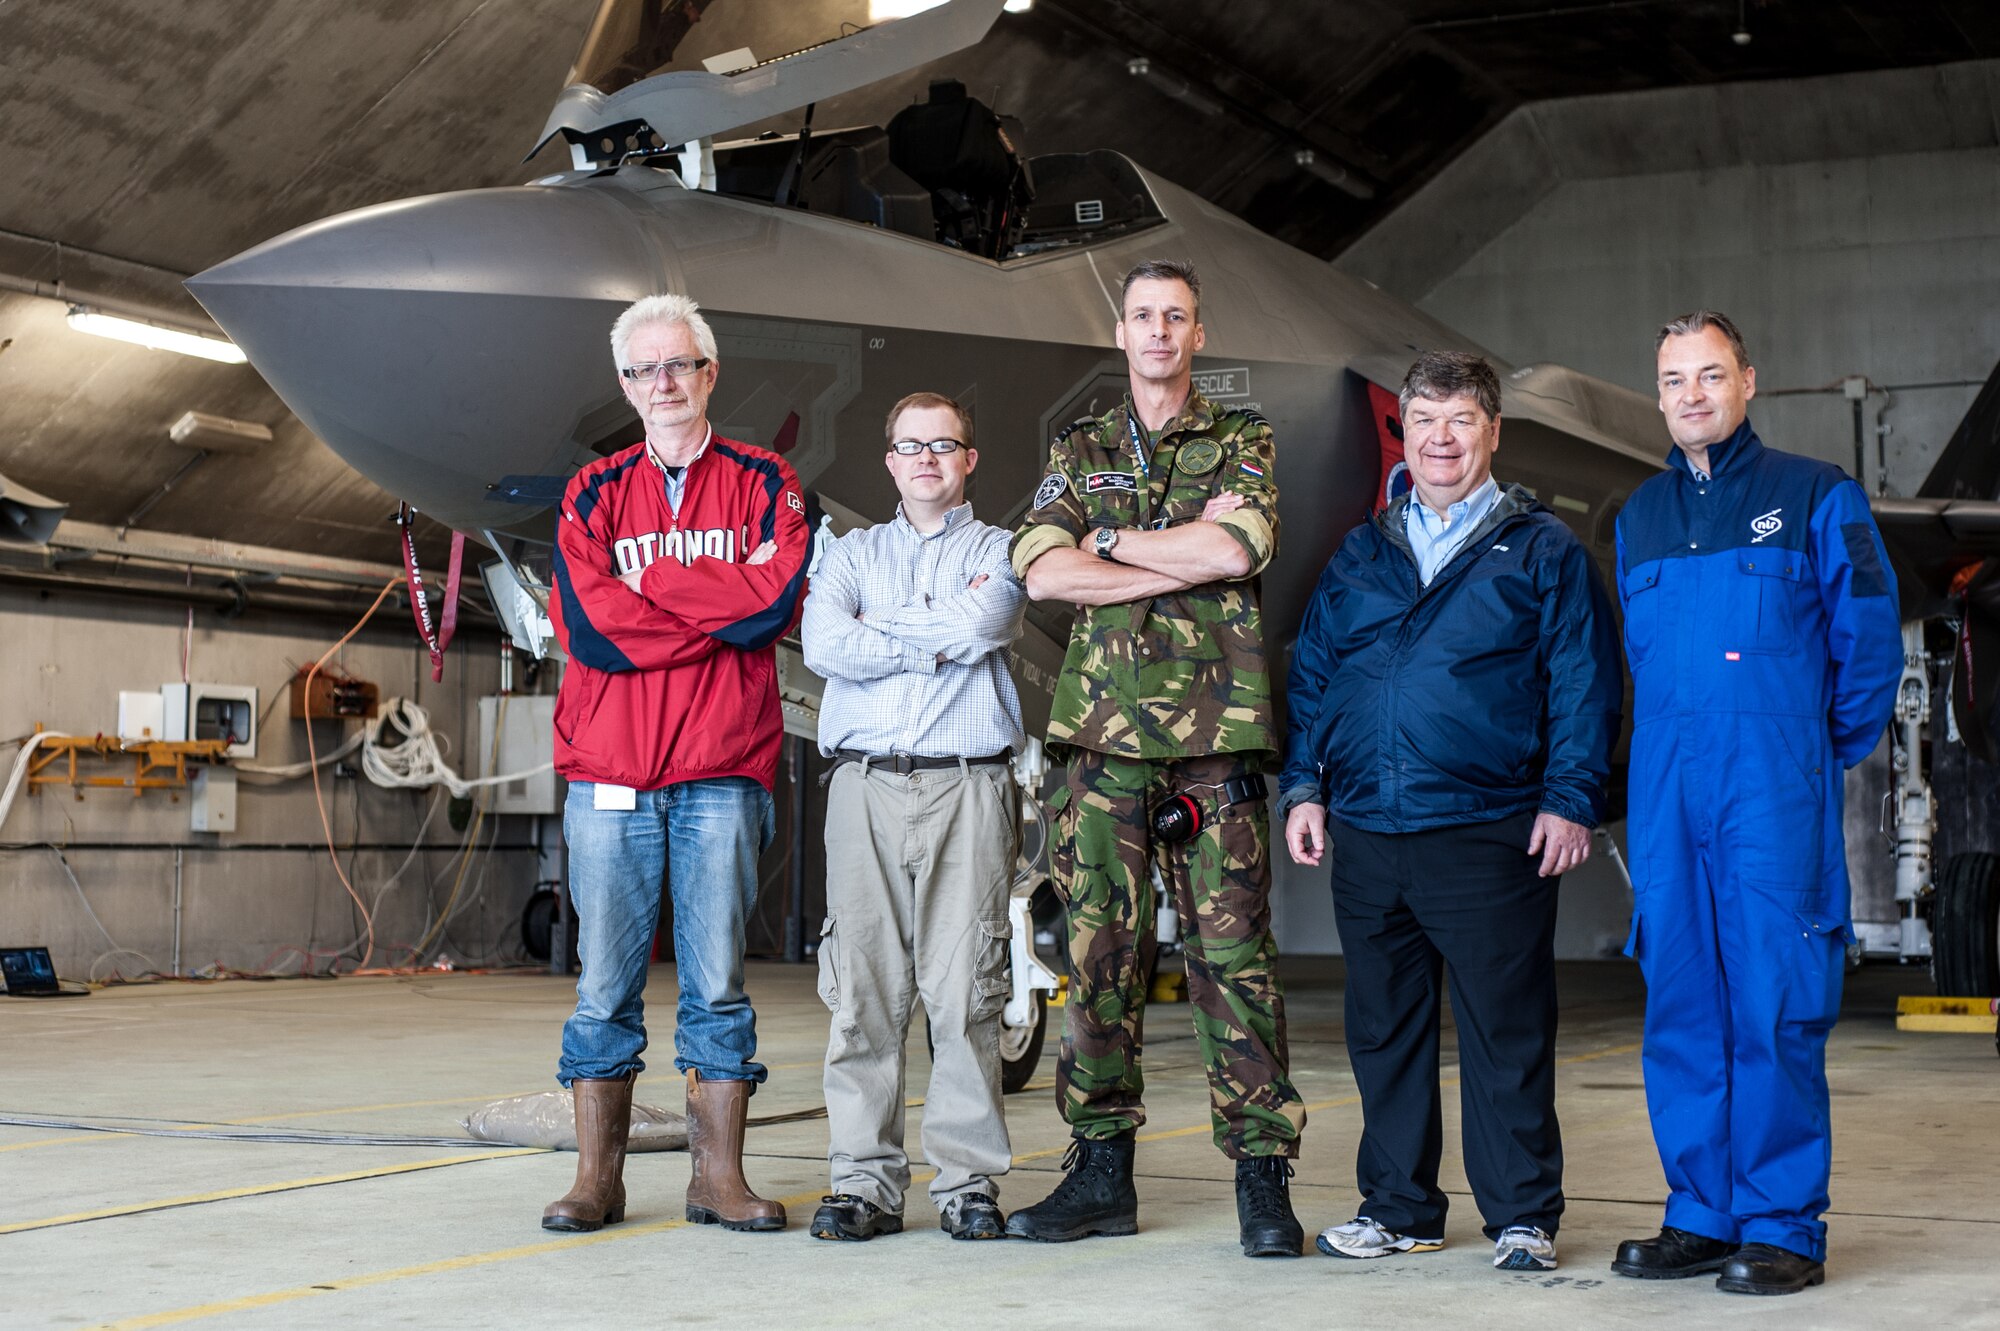 (left to right) Jaap van ‘t Hof, with the Netherlands TNO Laboratory; Alan Wall, with the U.S. Air Force Research Laboratory; Maj. Arthur L. Driesen, with the Royal Netherlands Air Force; Richard McKinley, with the U.S. Air Force Research Laboratory (now retired); and Theo van Veen, with the Netherlands Aerospace Centre, stand in front of the F-35 used during an acoustics testing session, led by experts in AFRL’s 711th Human Performance Wing. (Photo courtesy of Royal Netherlands Air Force)